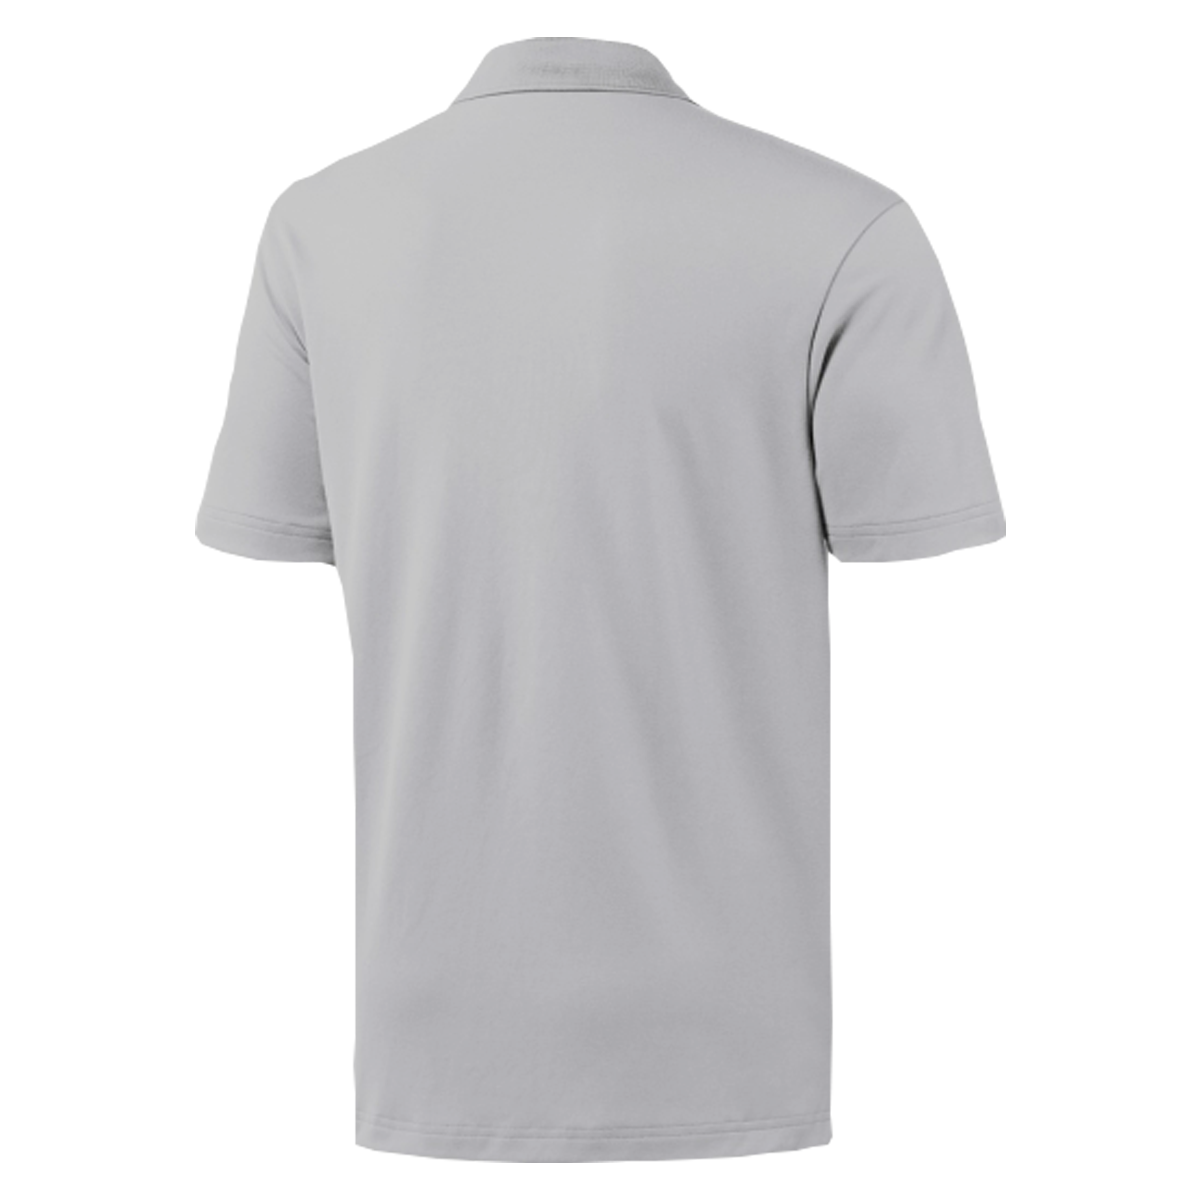 Grey Polo Shirt - Unisex - Branding & Printing Solutions Company in ...